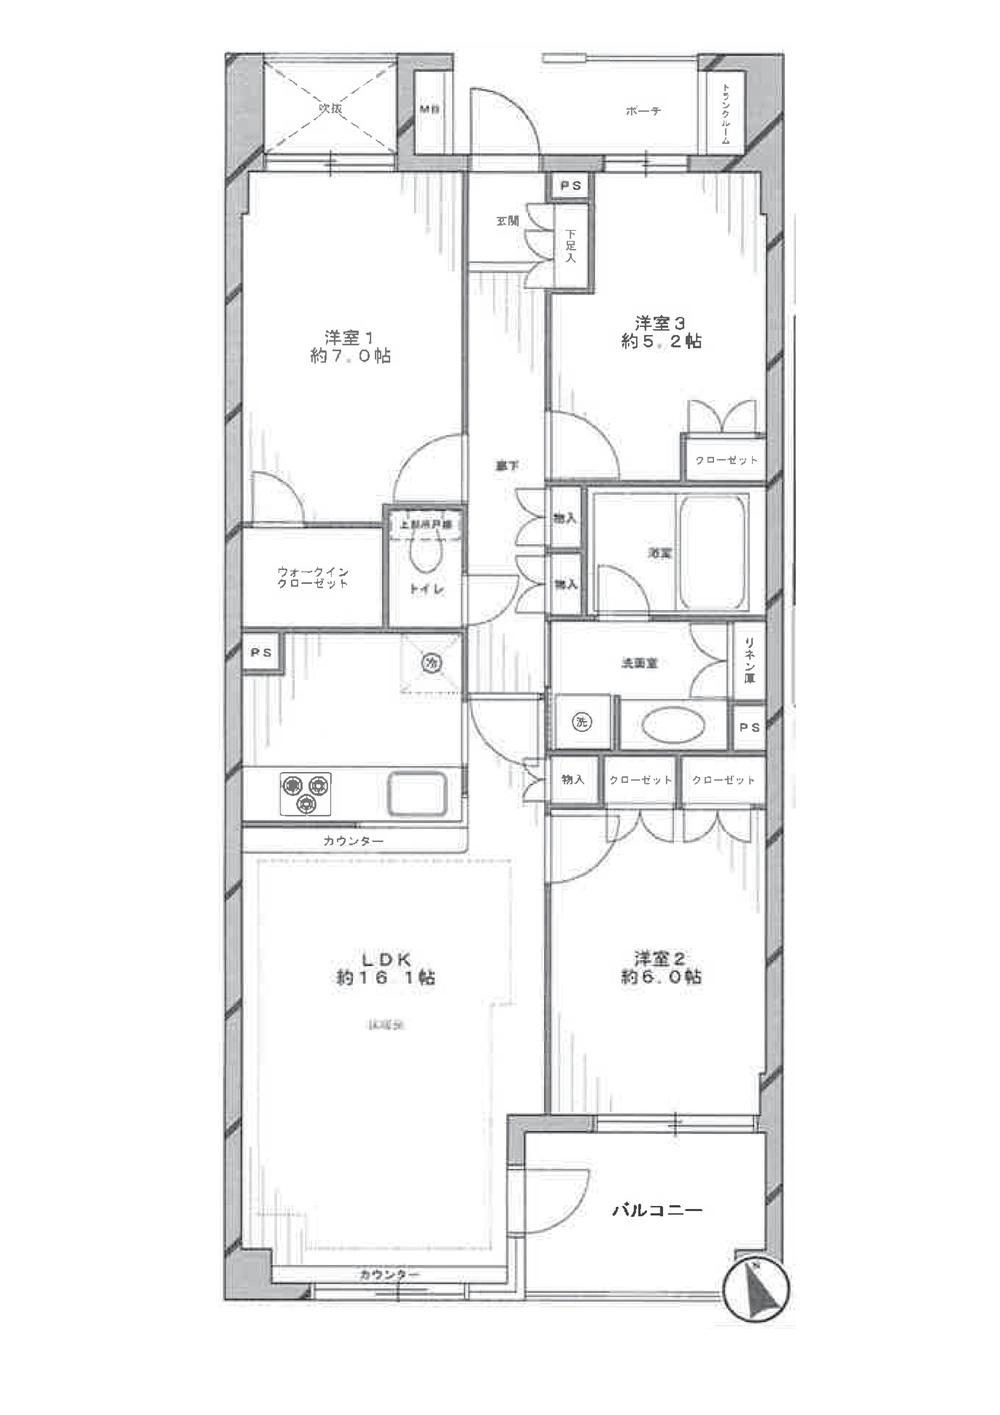 Floor plan. 3LDK, Price 57,800,000 yen, Occupied area 78.42 sq m , On the balcony area 6 sq m southwest, Spacious balcony, Walk-in closet, Easy-to-use face-to-face kitchen LDK and in the loose, It is very livable floor plan.